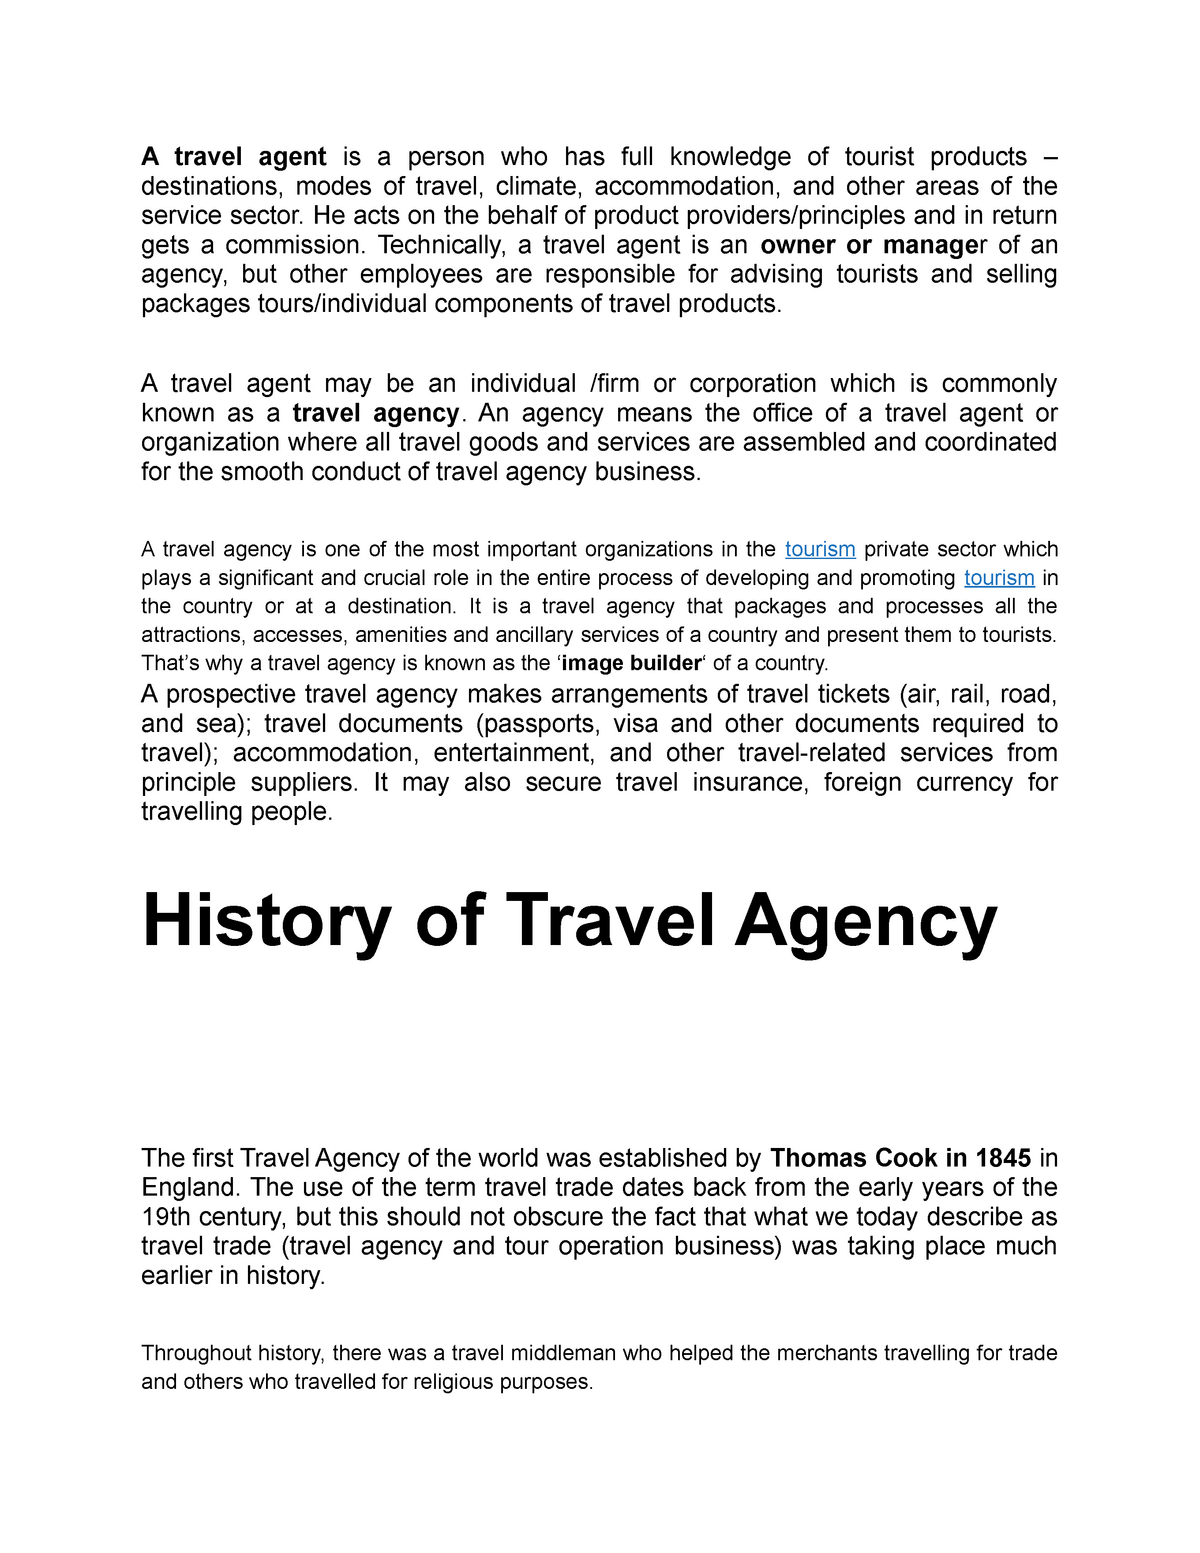 dialogue about travel agency